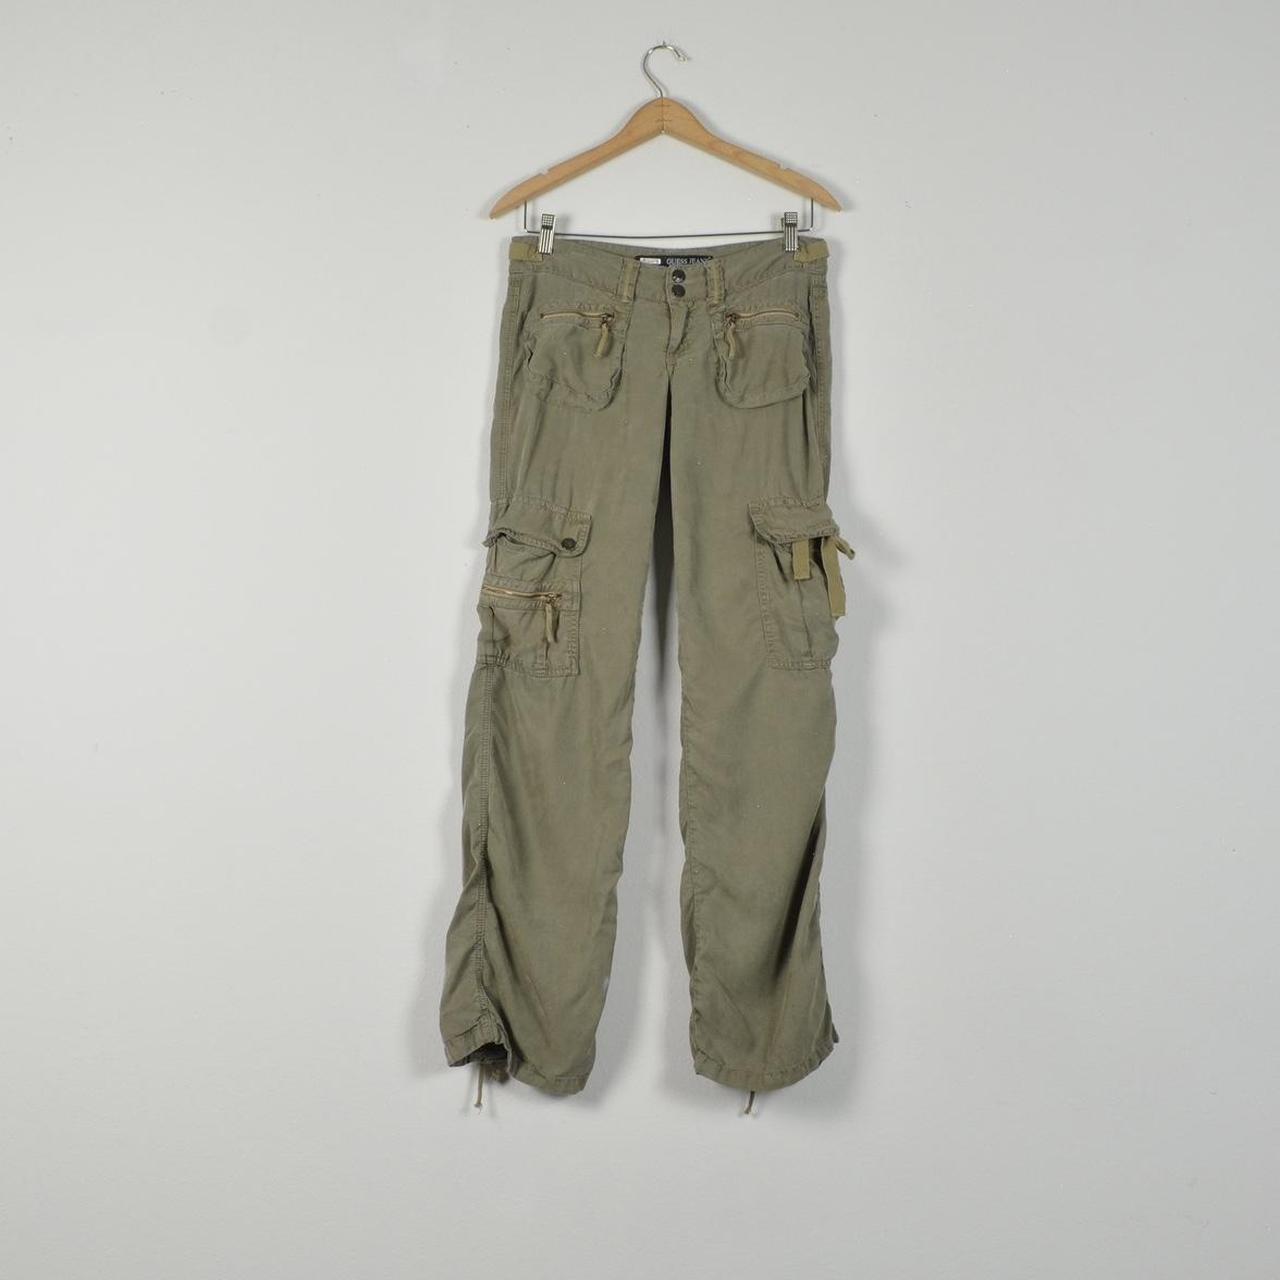 Guess 2000s Cargo Low Rise Green Army Pants